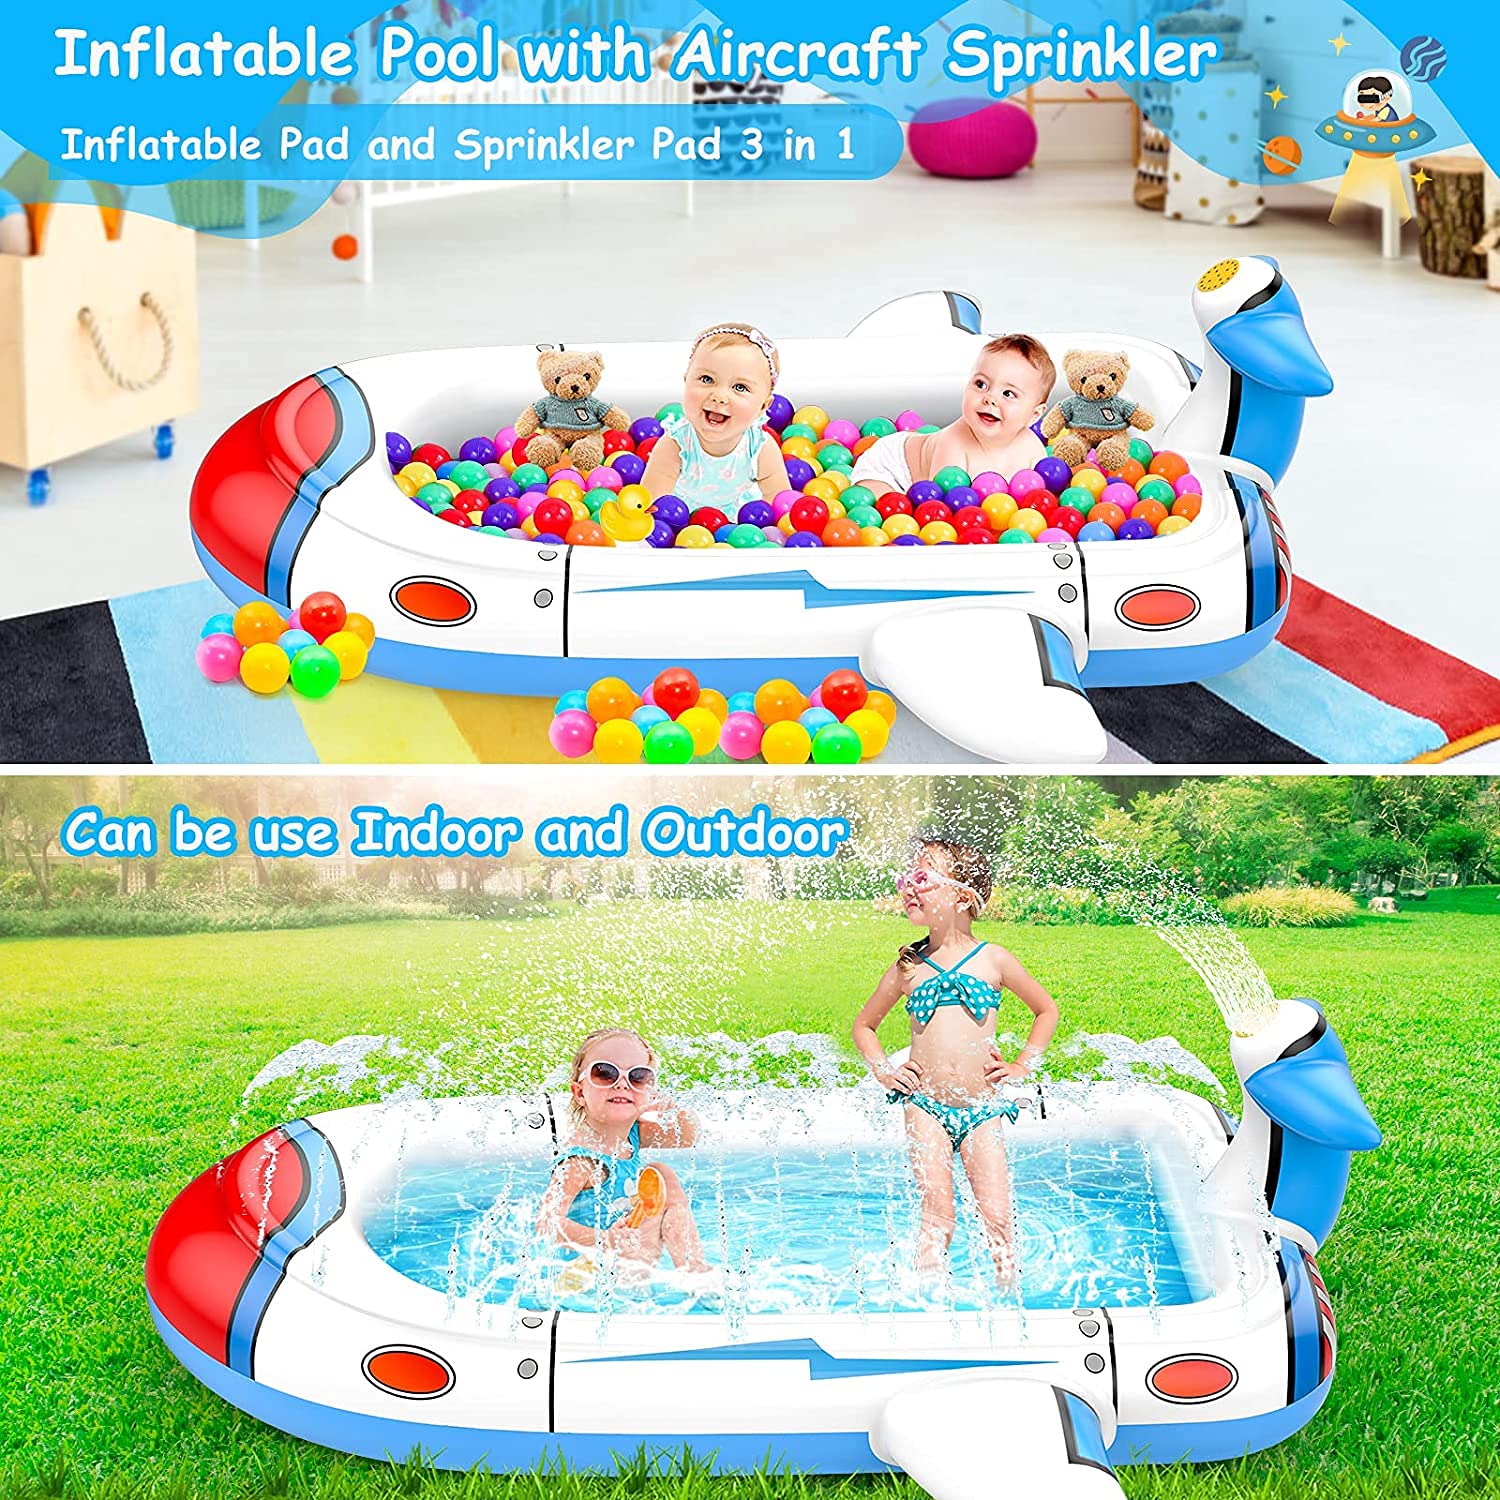    Air-Plane-Inflatable-Splash-Pad-Sprinkler-Pool-for-Kids indoor and outdoor use